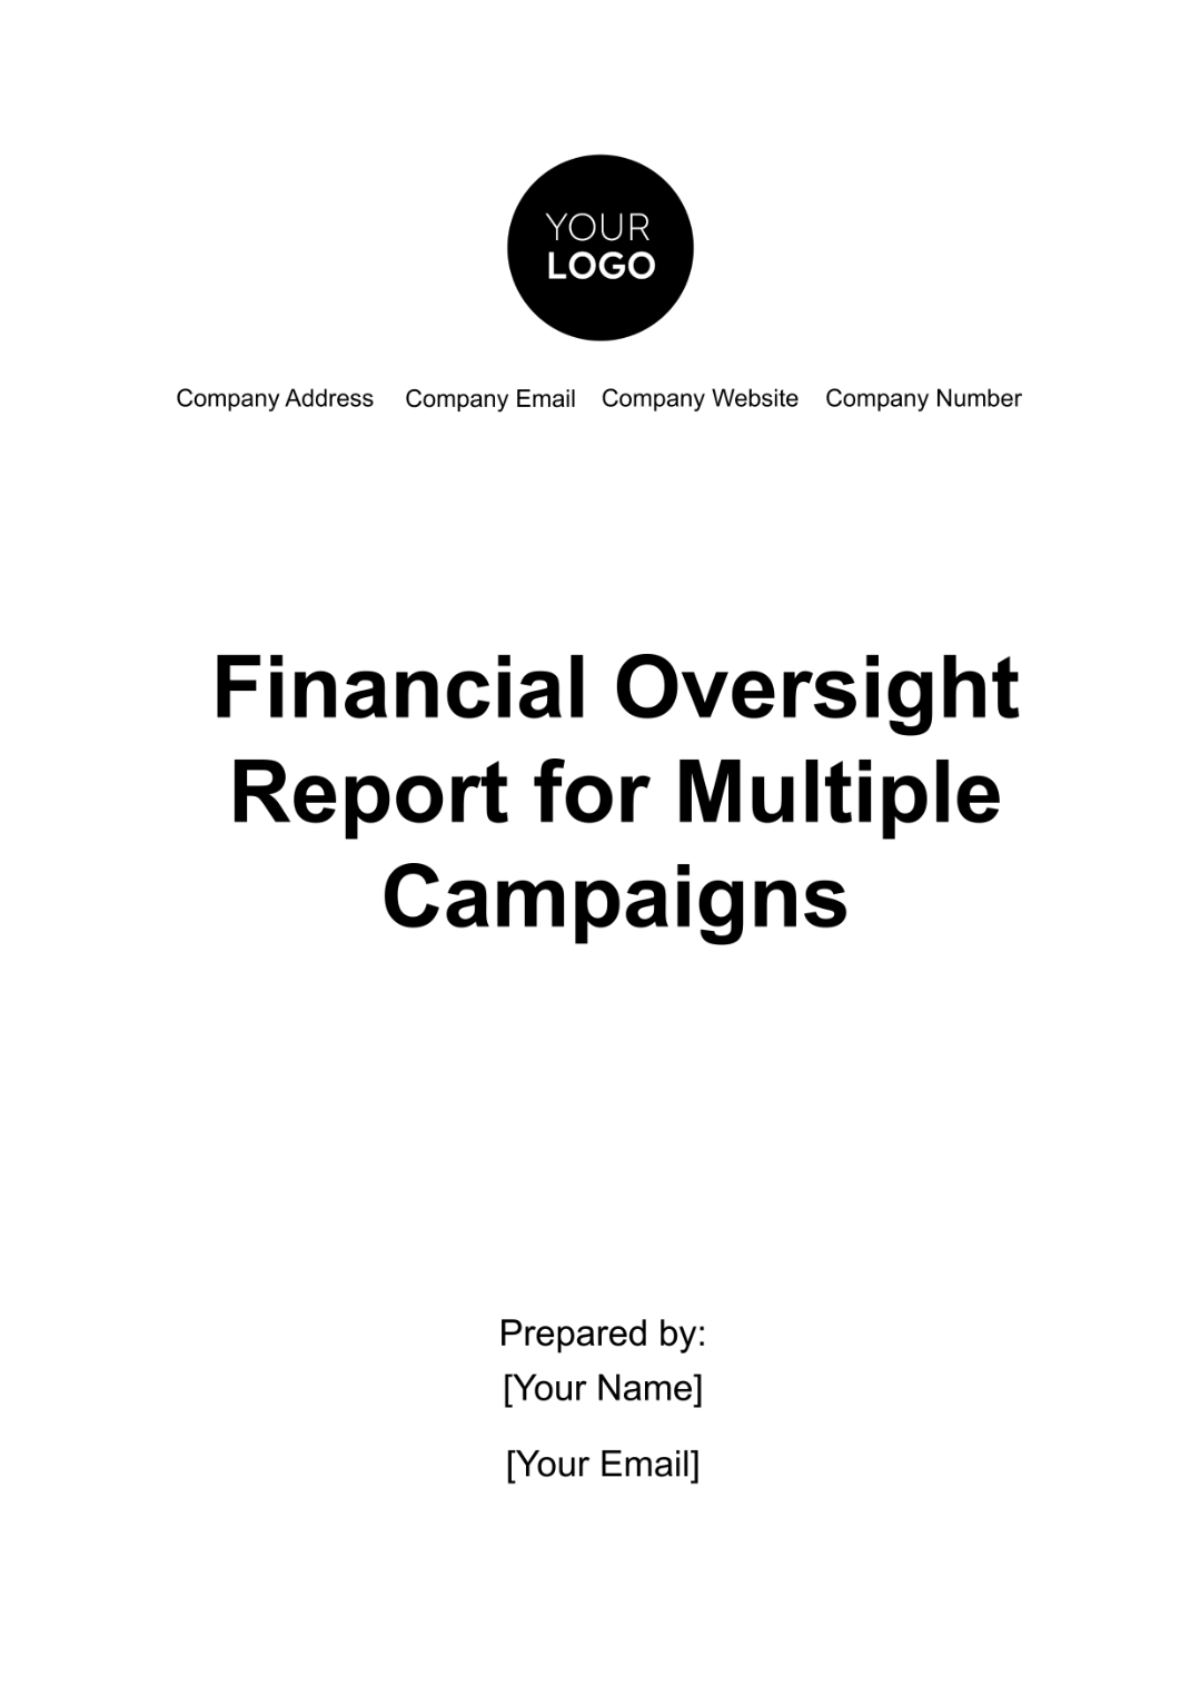 Free Financial Oversight Report for Multiple Campaigns Template